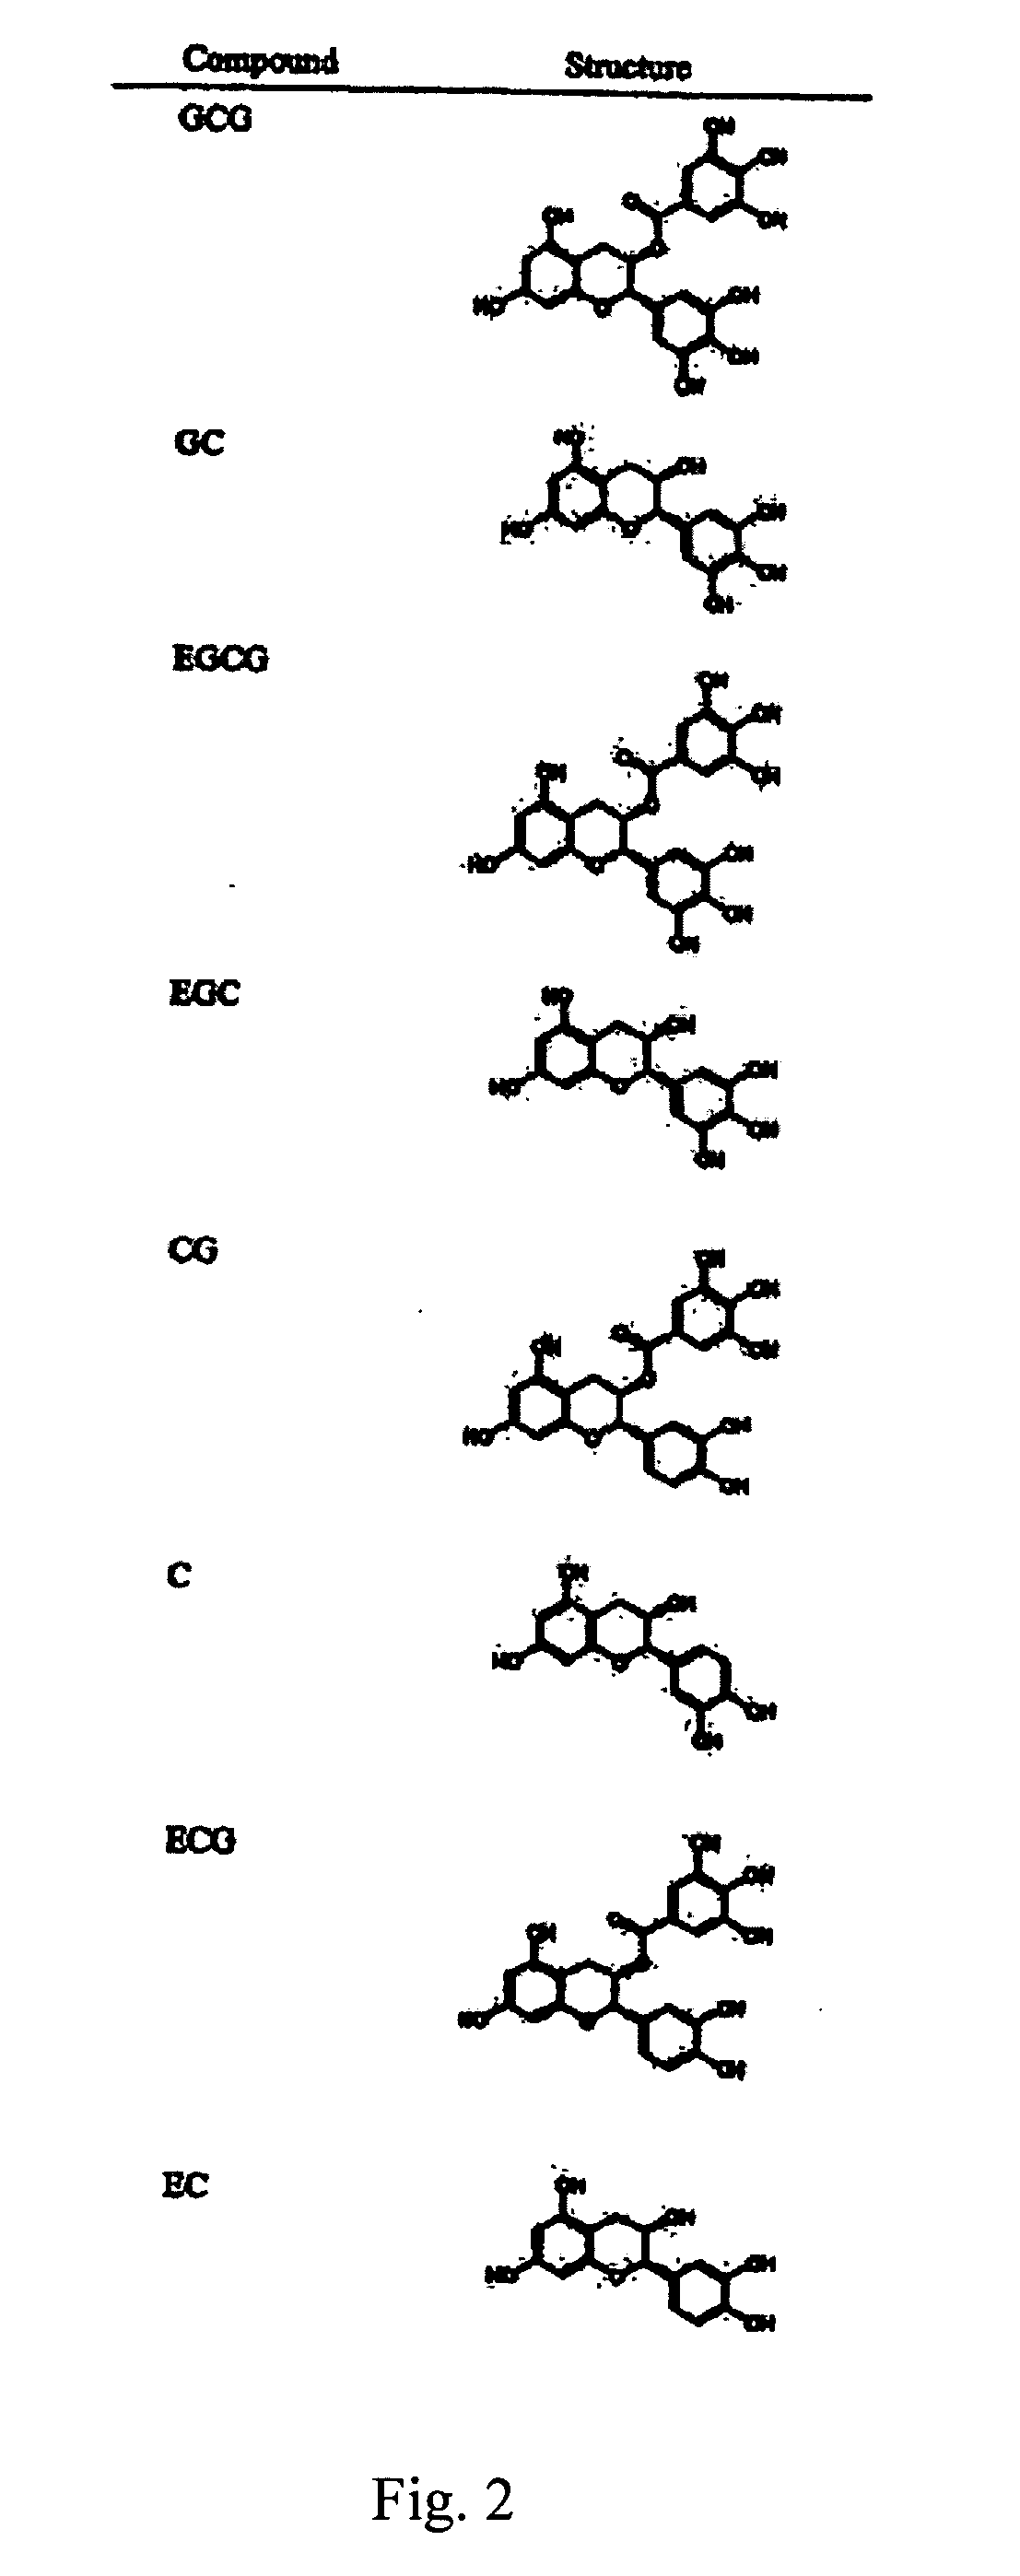 Composition and method for delivery of phytochemicals